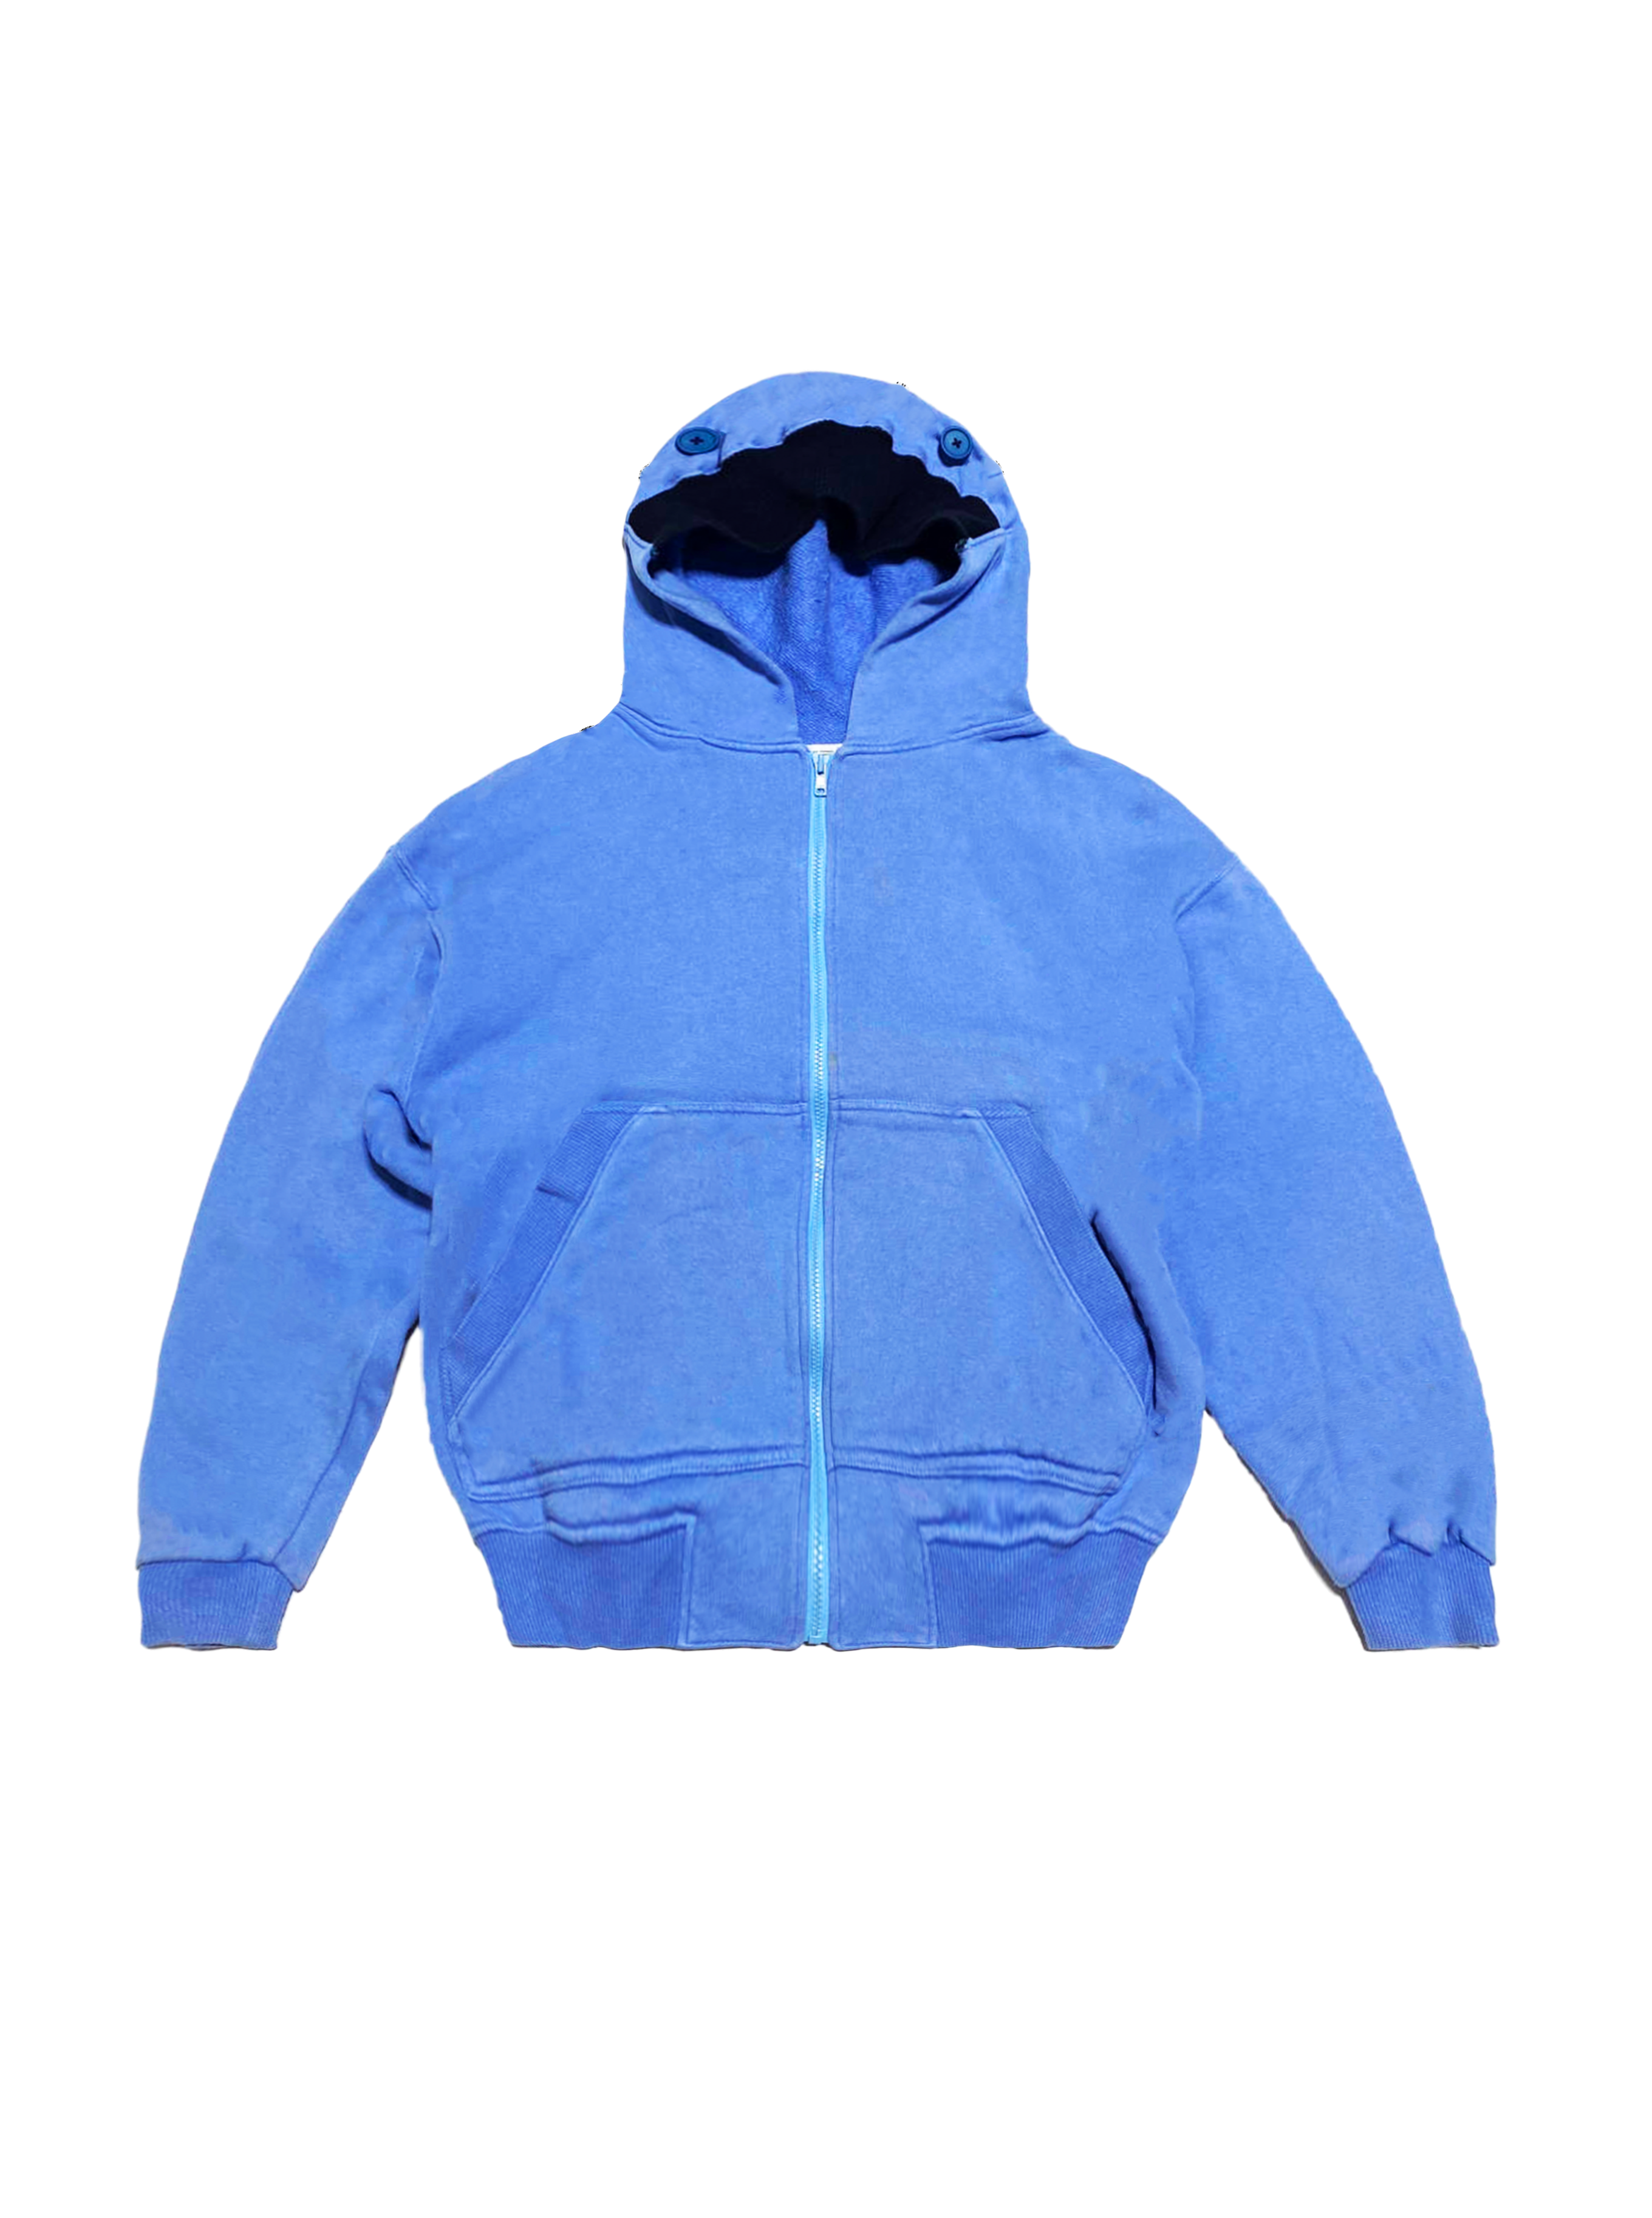 2000s Archive Technical Hoodie Jacket